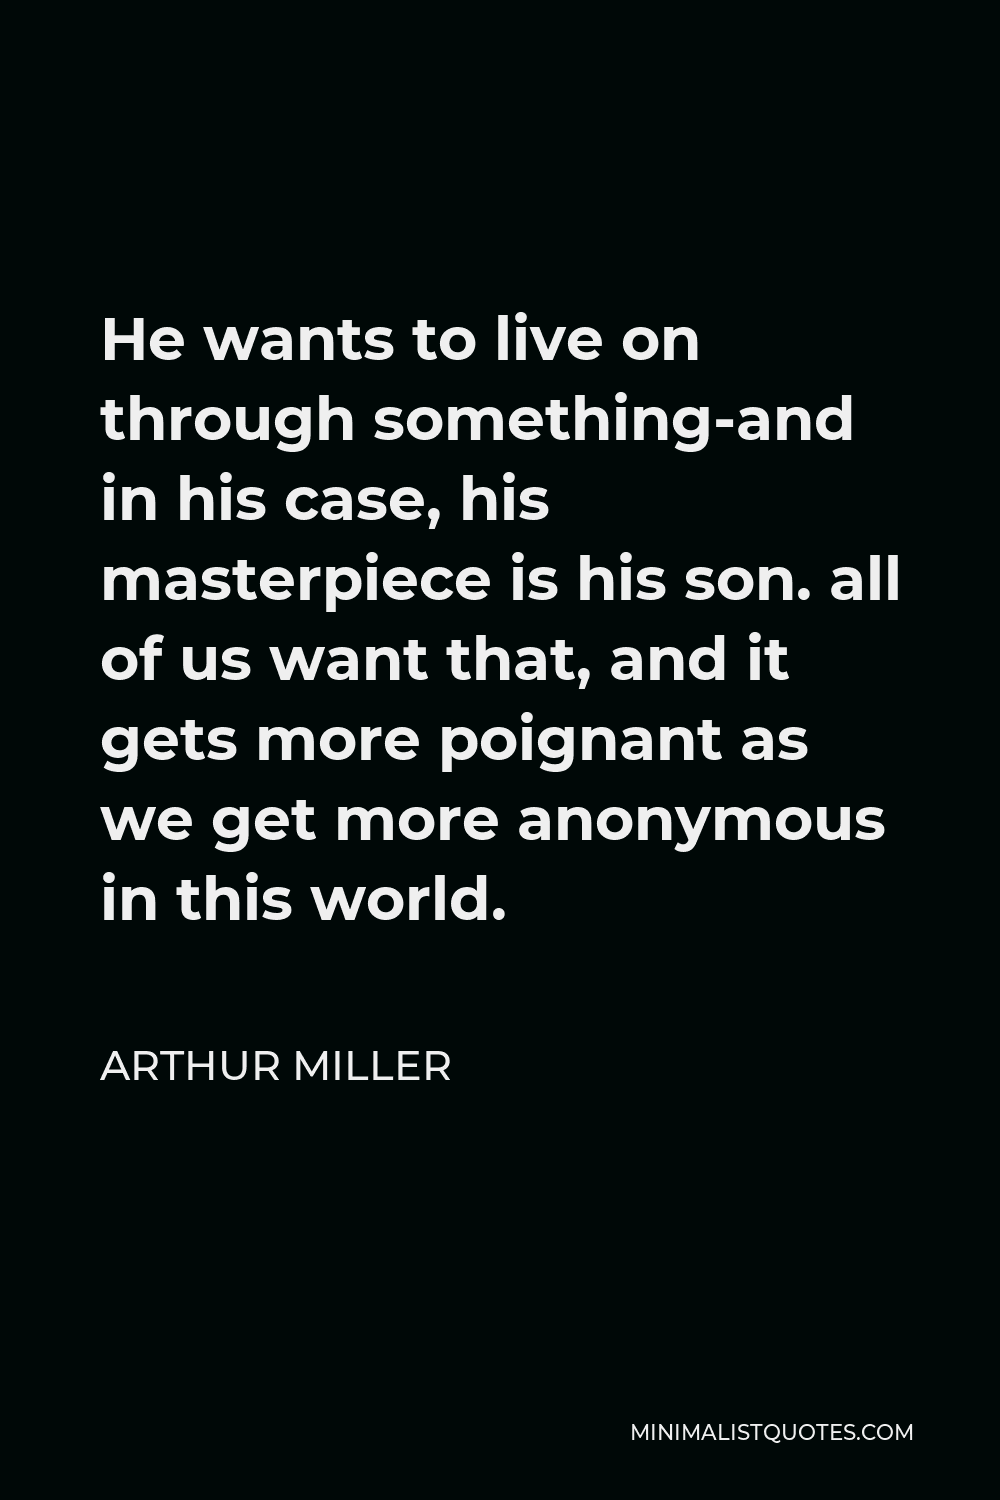 Arthur Miller Quote - He wants to live on through something-and in his case, his masterpiece is his son. all of us want that, and it gets more poignant as we get more anonymous in this world.